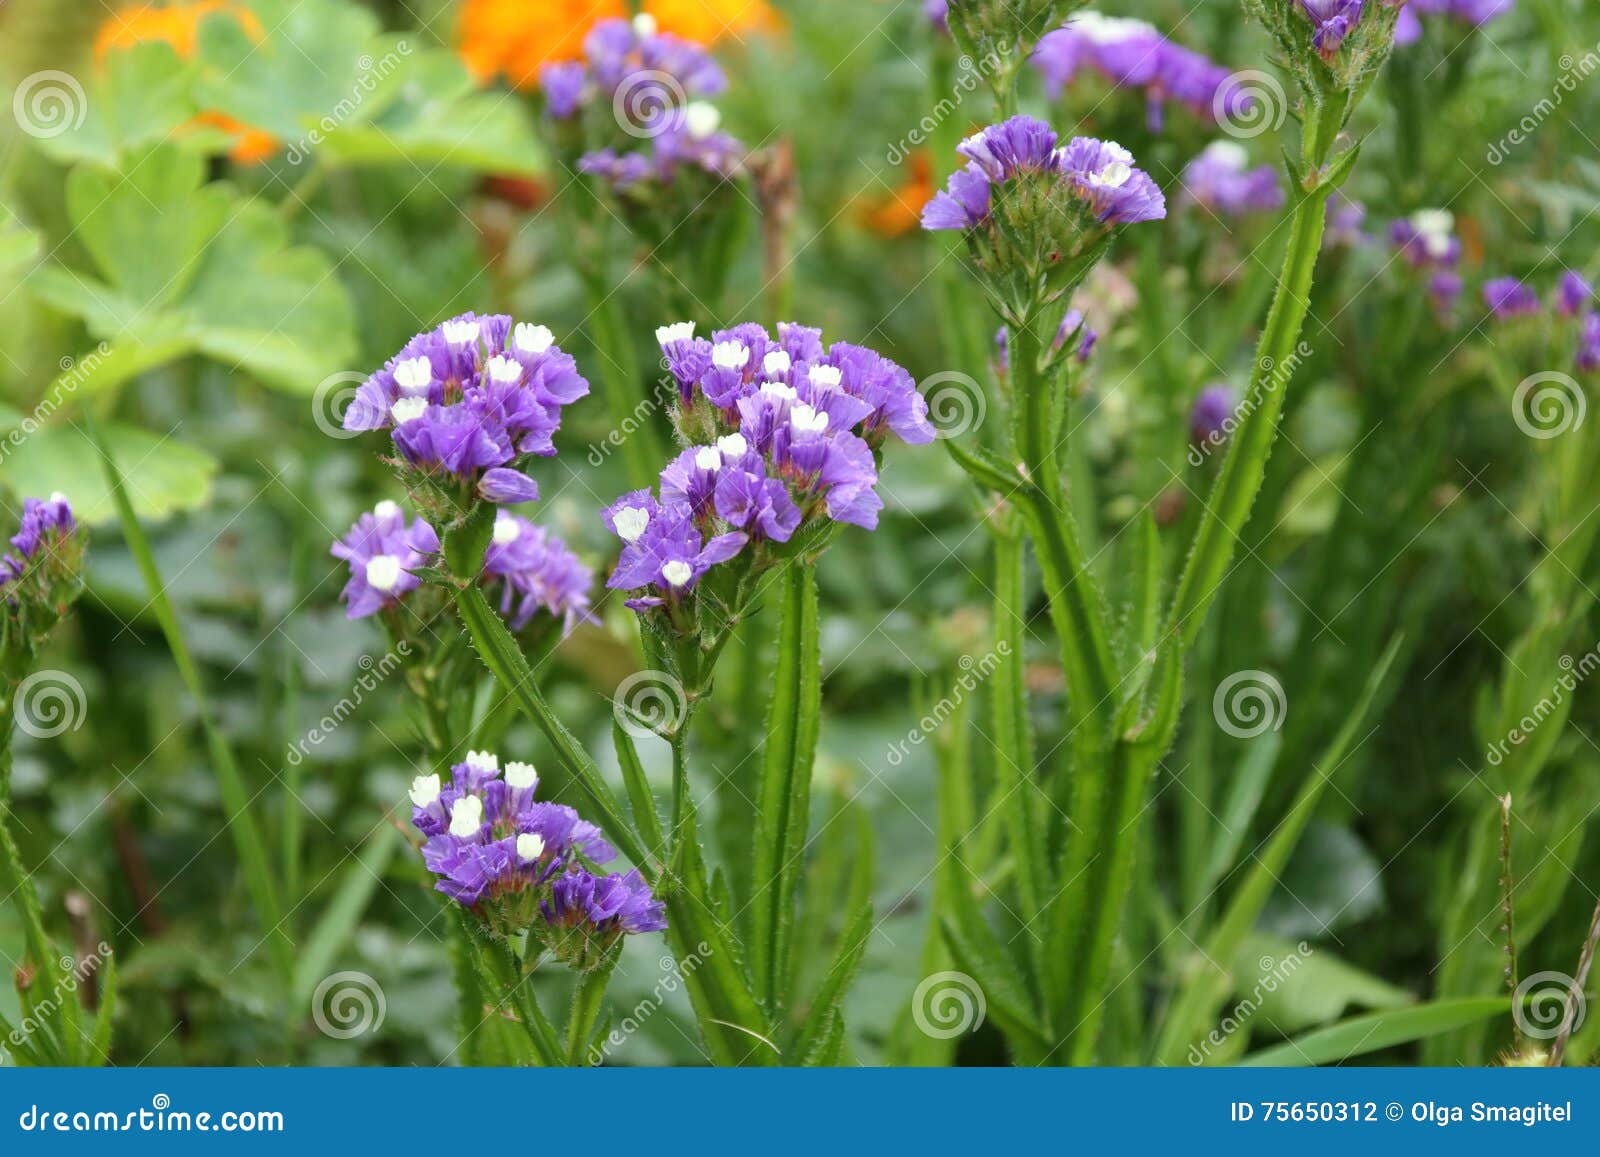 purple and white statice flowers